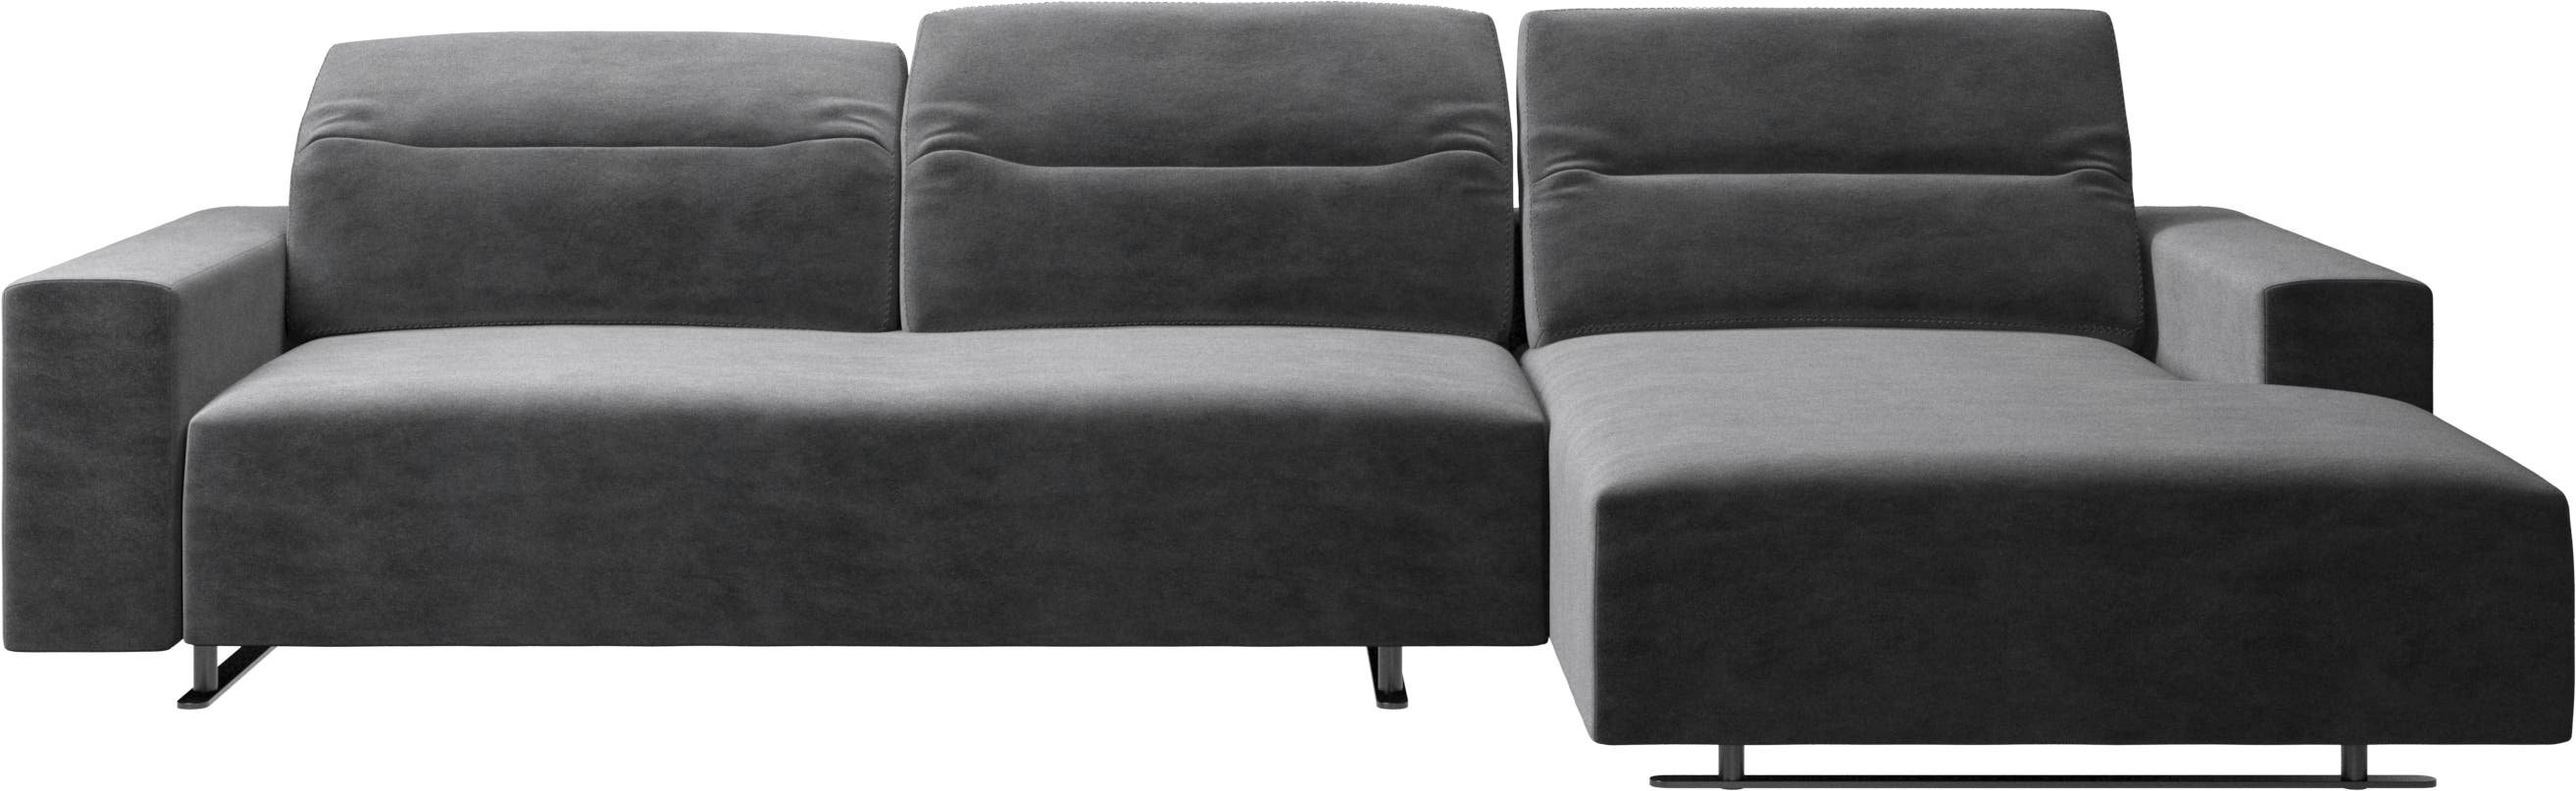 Hampton sofa with adjustable back and resting unit right side